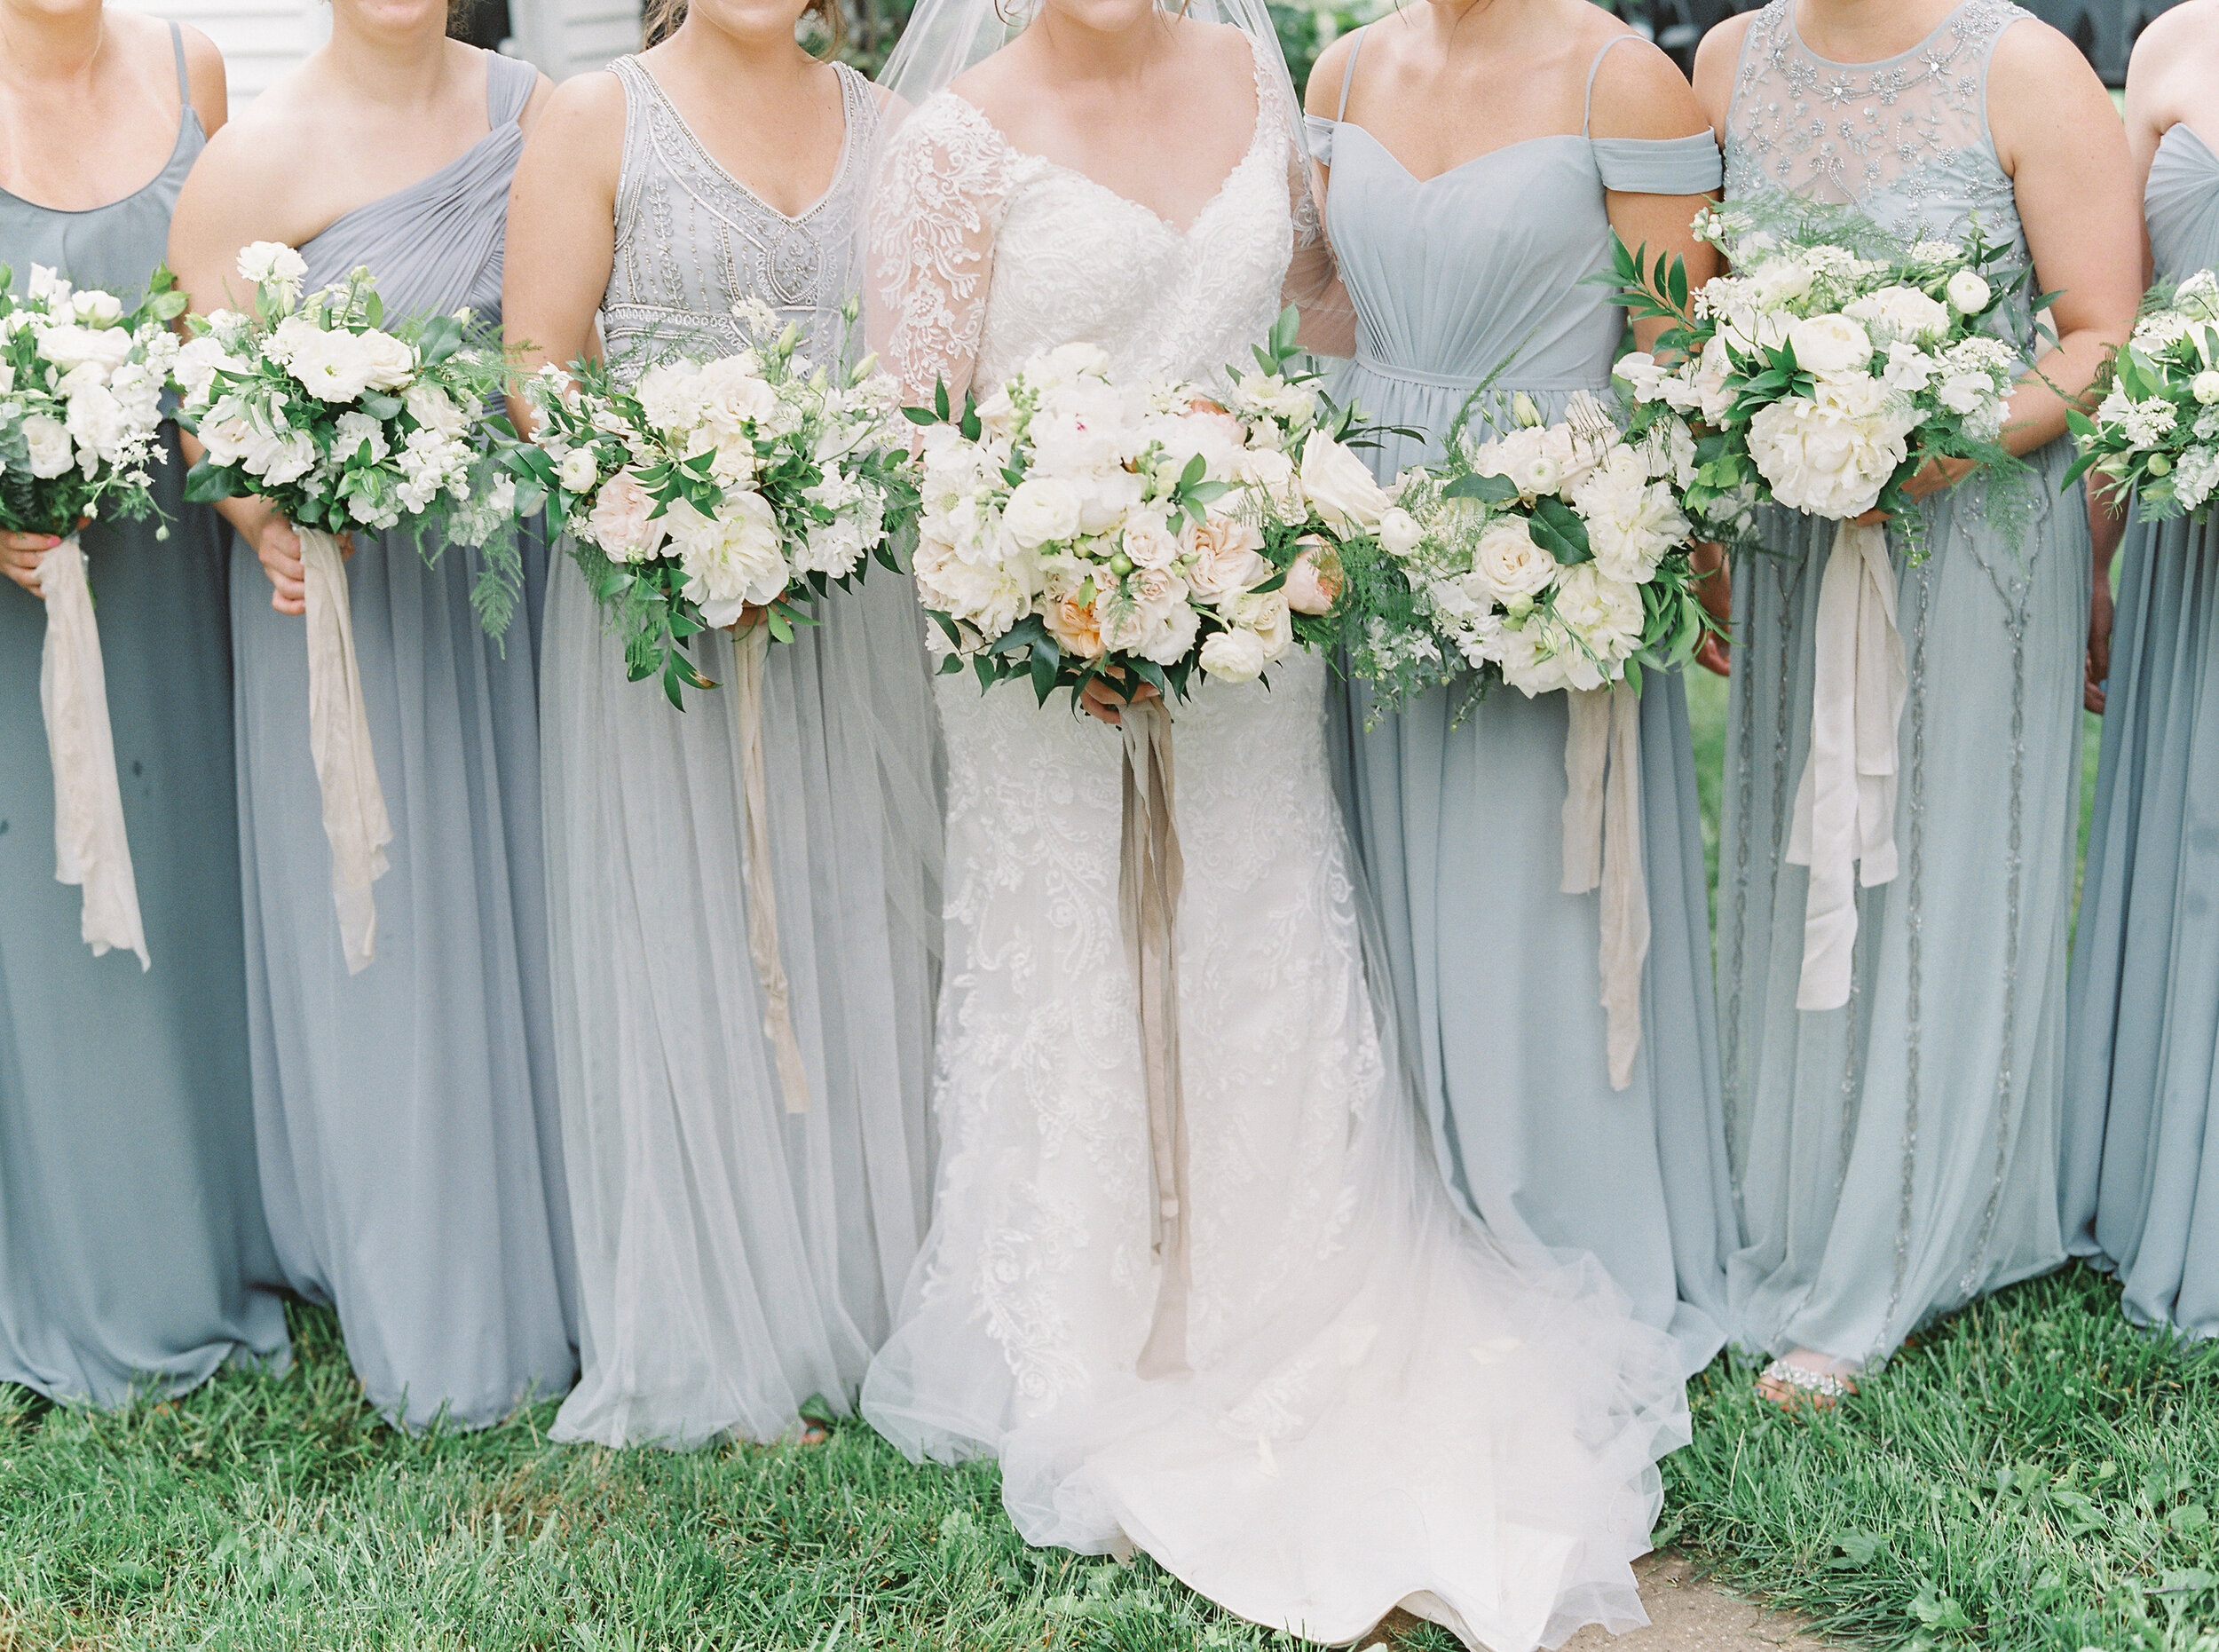 Upselling the Bridesmaid Bouquet